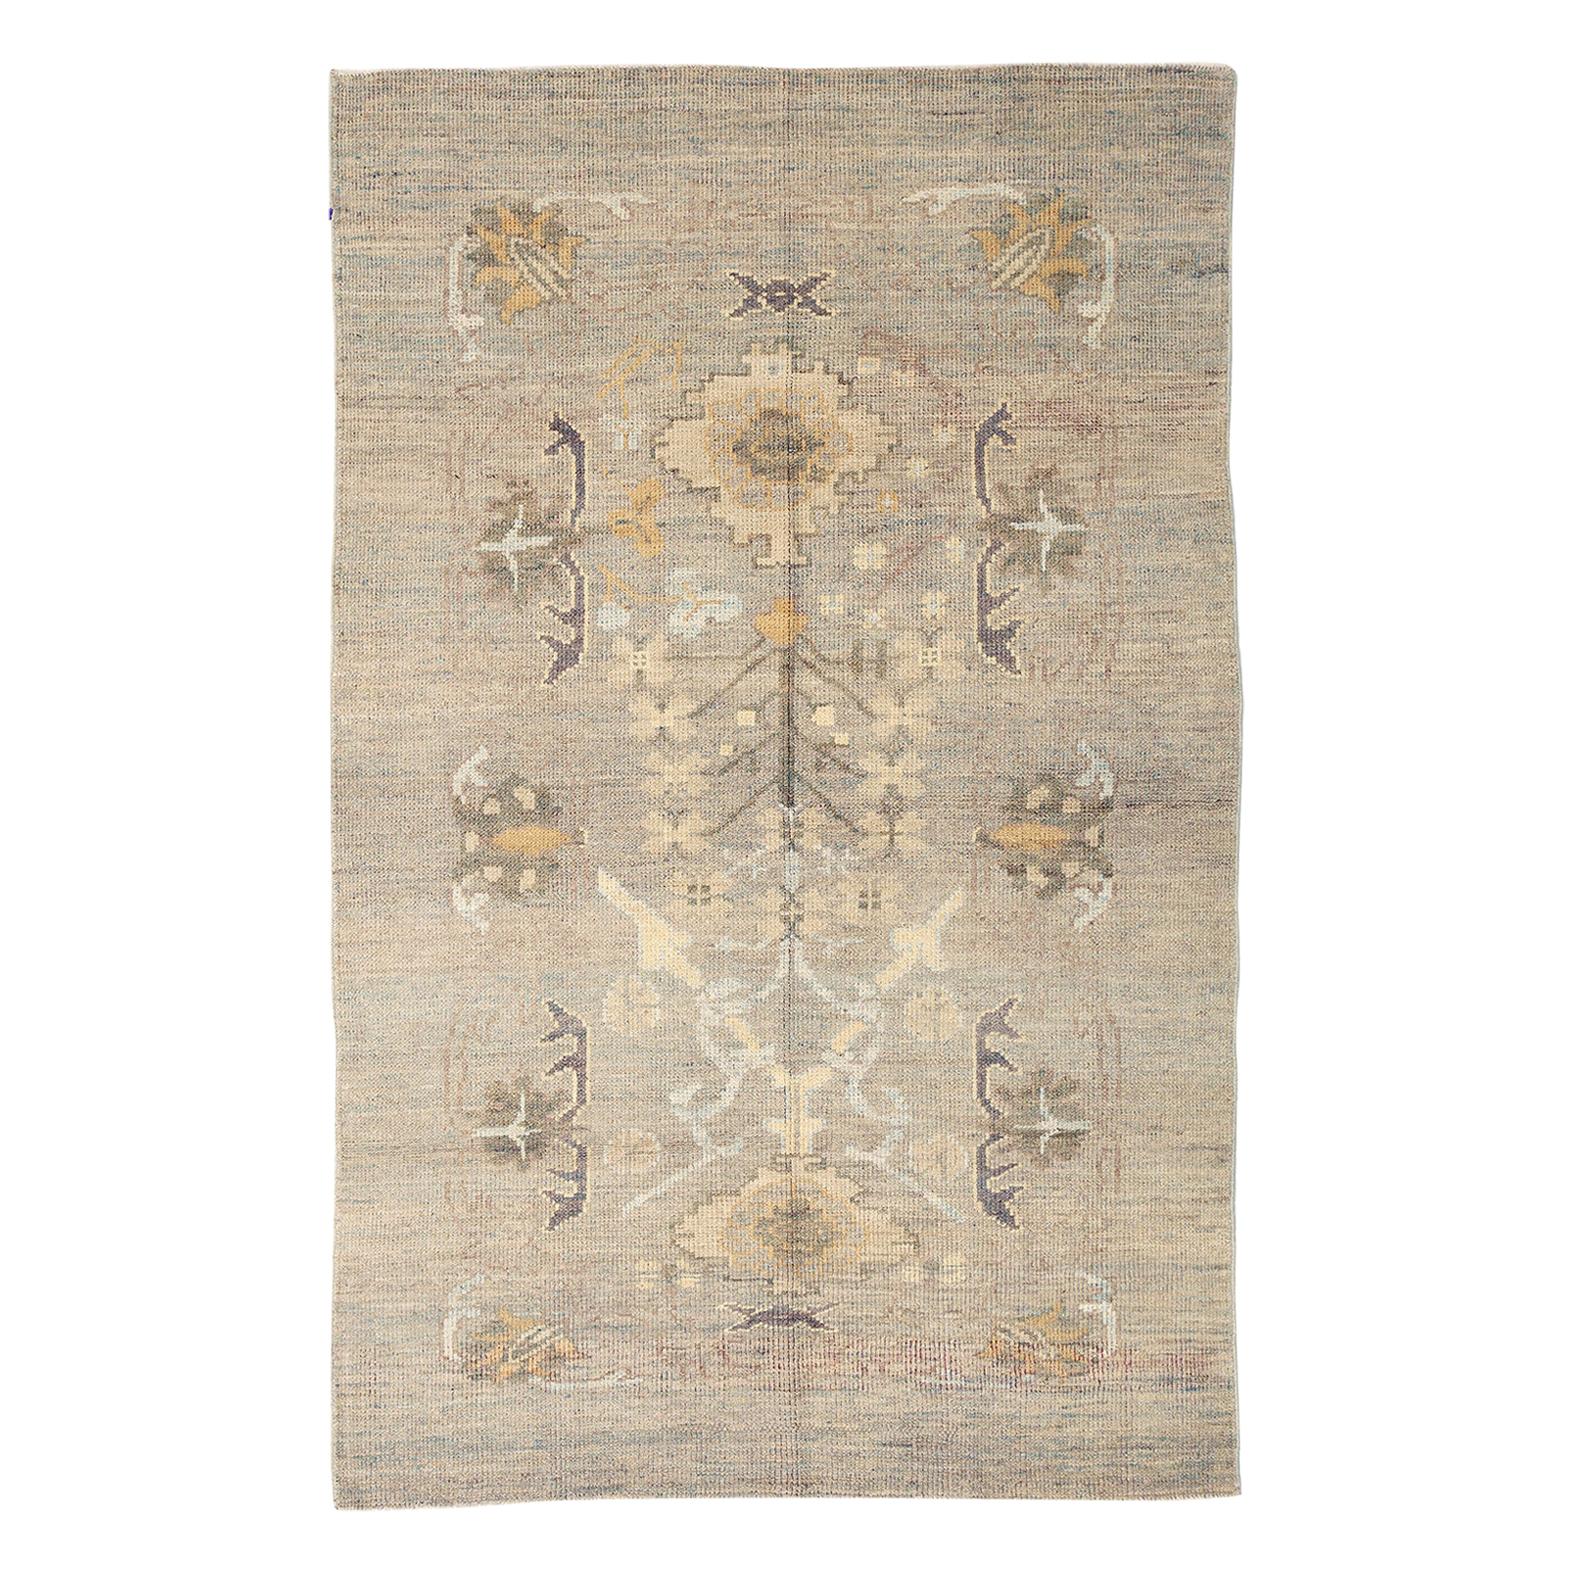 New Turkish Oushak Rug with Gray and Beige Botanical Details For Sale